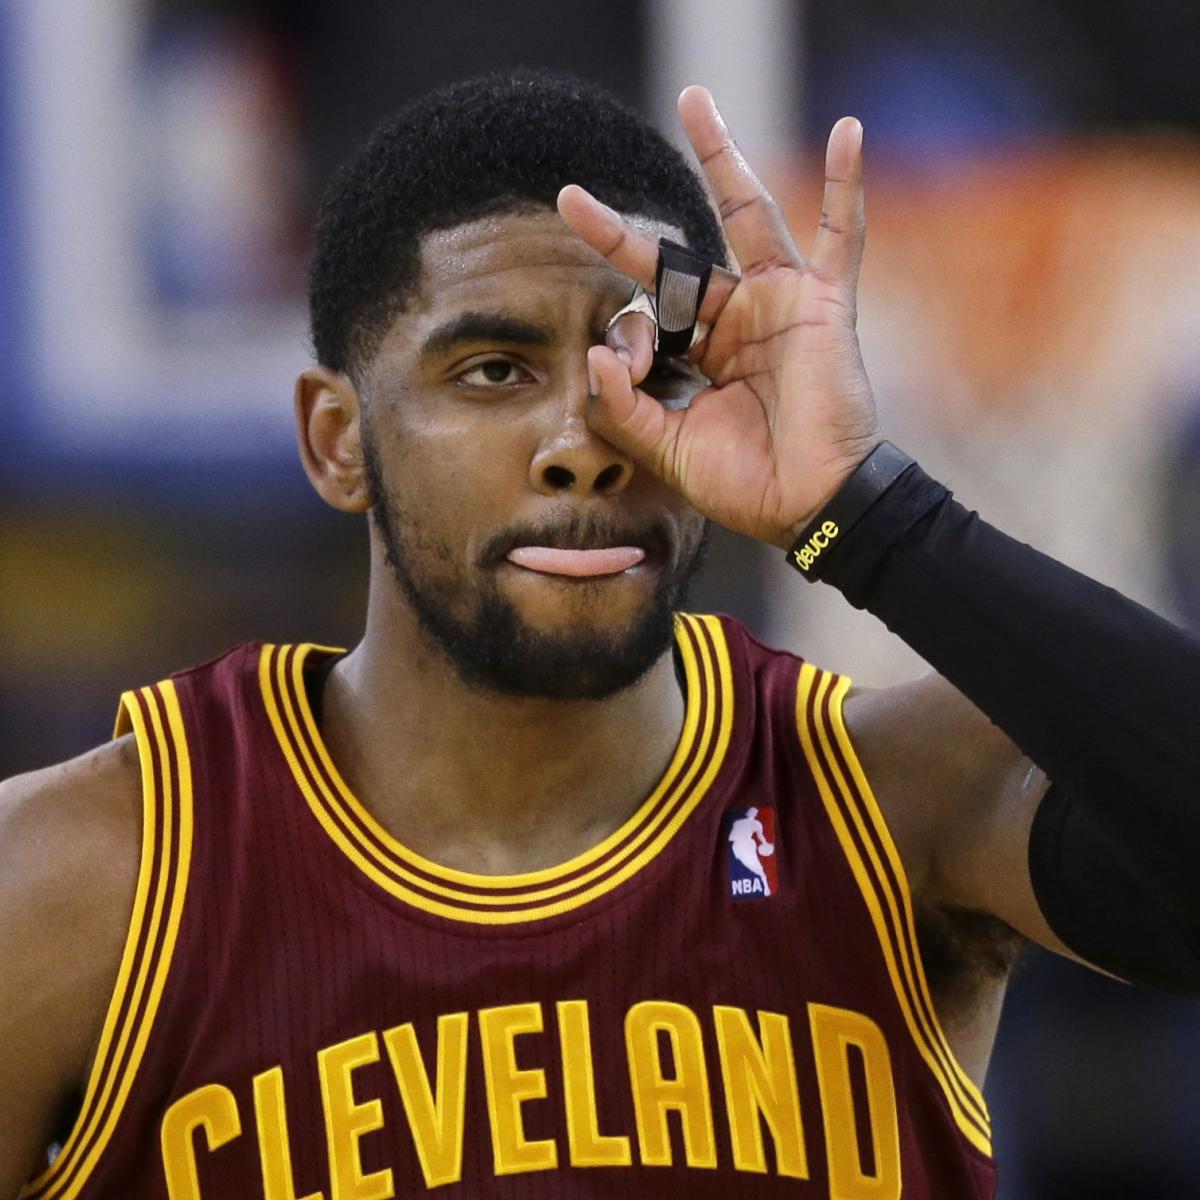 Kyrie Irving says Cavs are 'in a peculiar place.' Here's what he